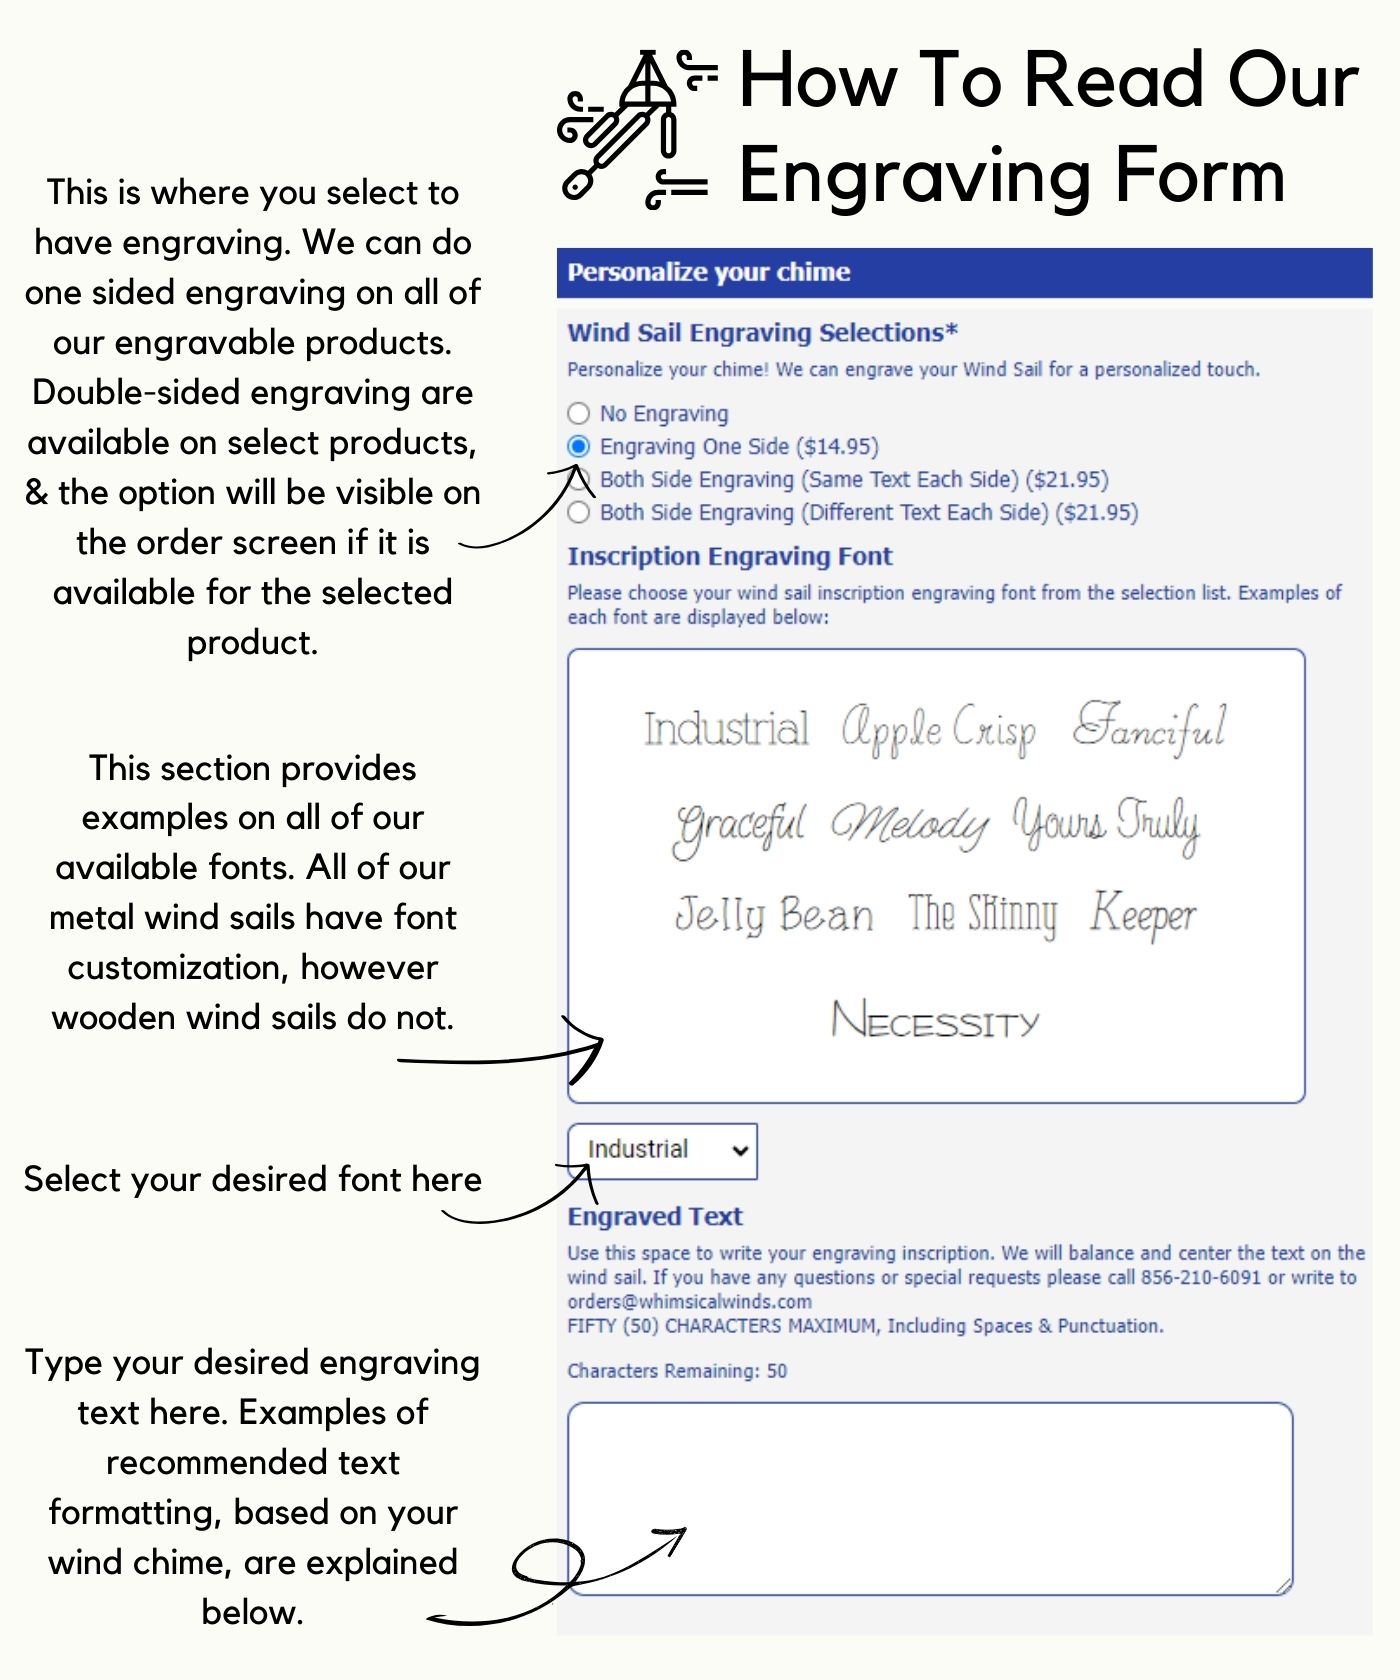 How To Read Our Engraving Form This is where you select to have engraving. We can do one sided engraving on all of our engravable products. Double-sided engraving are available on select products, & the option will be visible on the order screen if it is available for the selected product. This section provides examples on all of our available fonts. All of our metal wind sails have font customization, however wooden wind sails do not. Select your desired font here Type your desired engraving text here. Examples of recommended text formatting, based on your wind chime, are explained below.